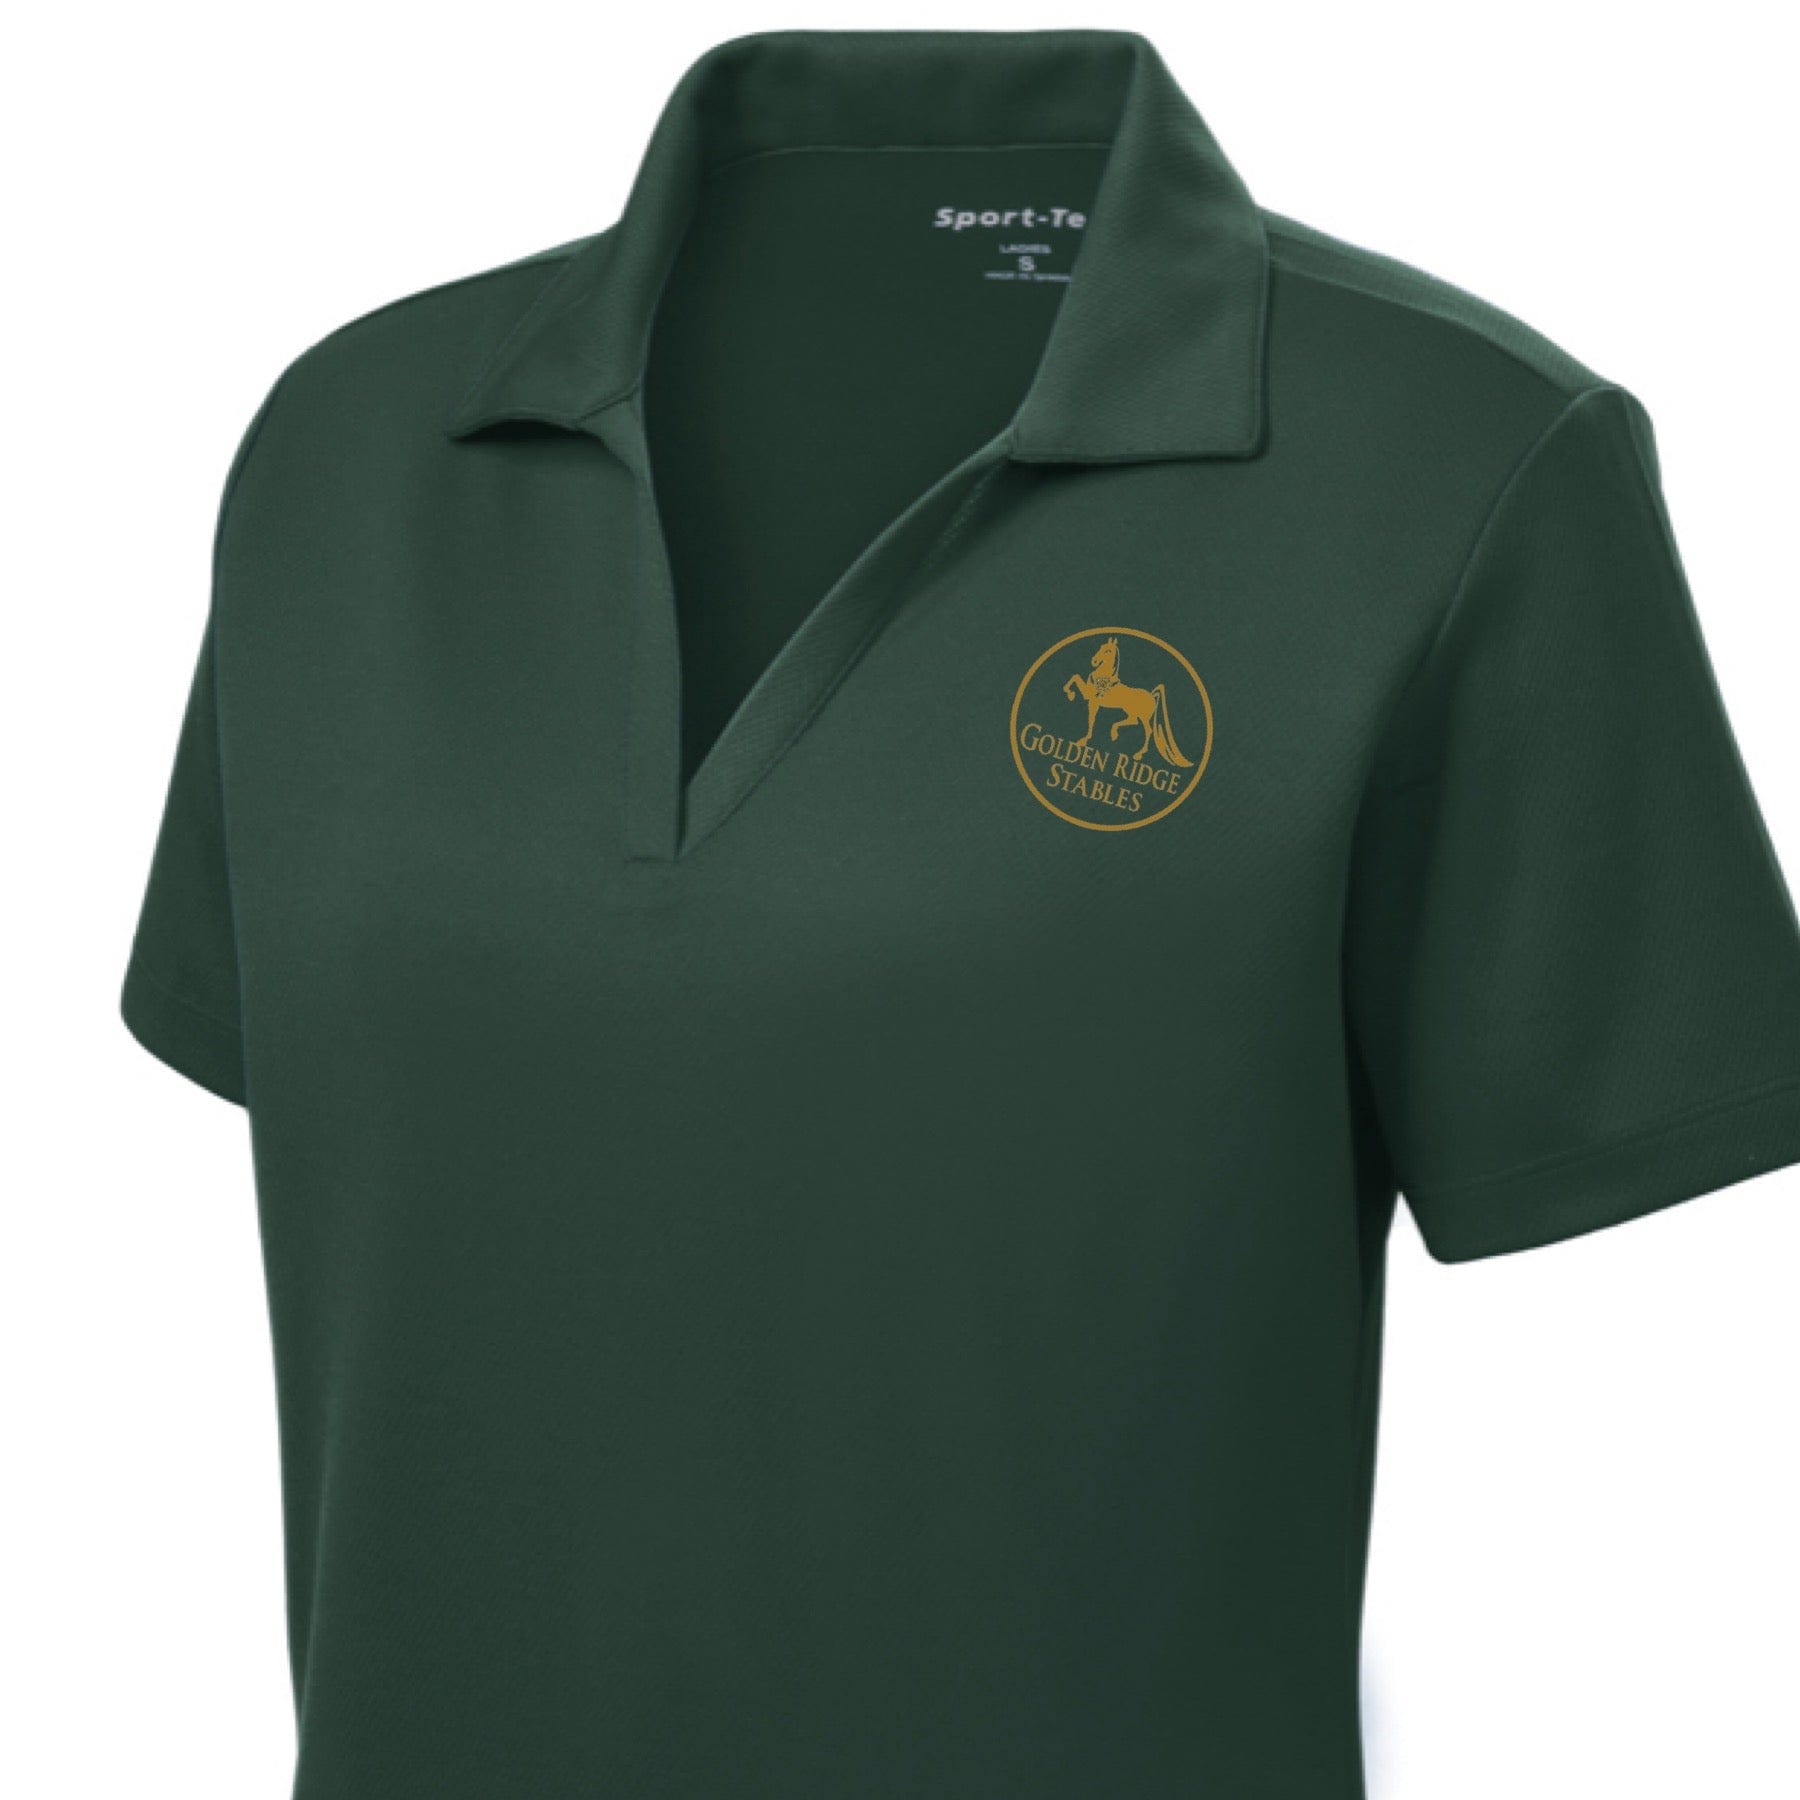 Equestrian Team Apparel Golden Ridge Stables Polo Shirt equestrian team apparel online tack store mobile tack store custom farm apparel custom show stable clothing equestrian lifestyle horse show clothing riding clothes horses equestrian tack store